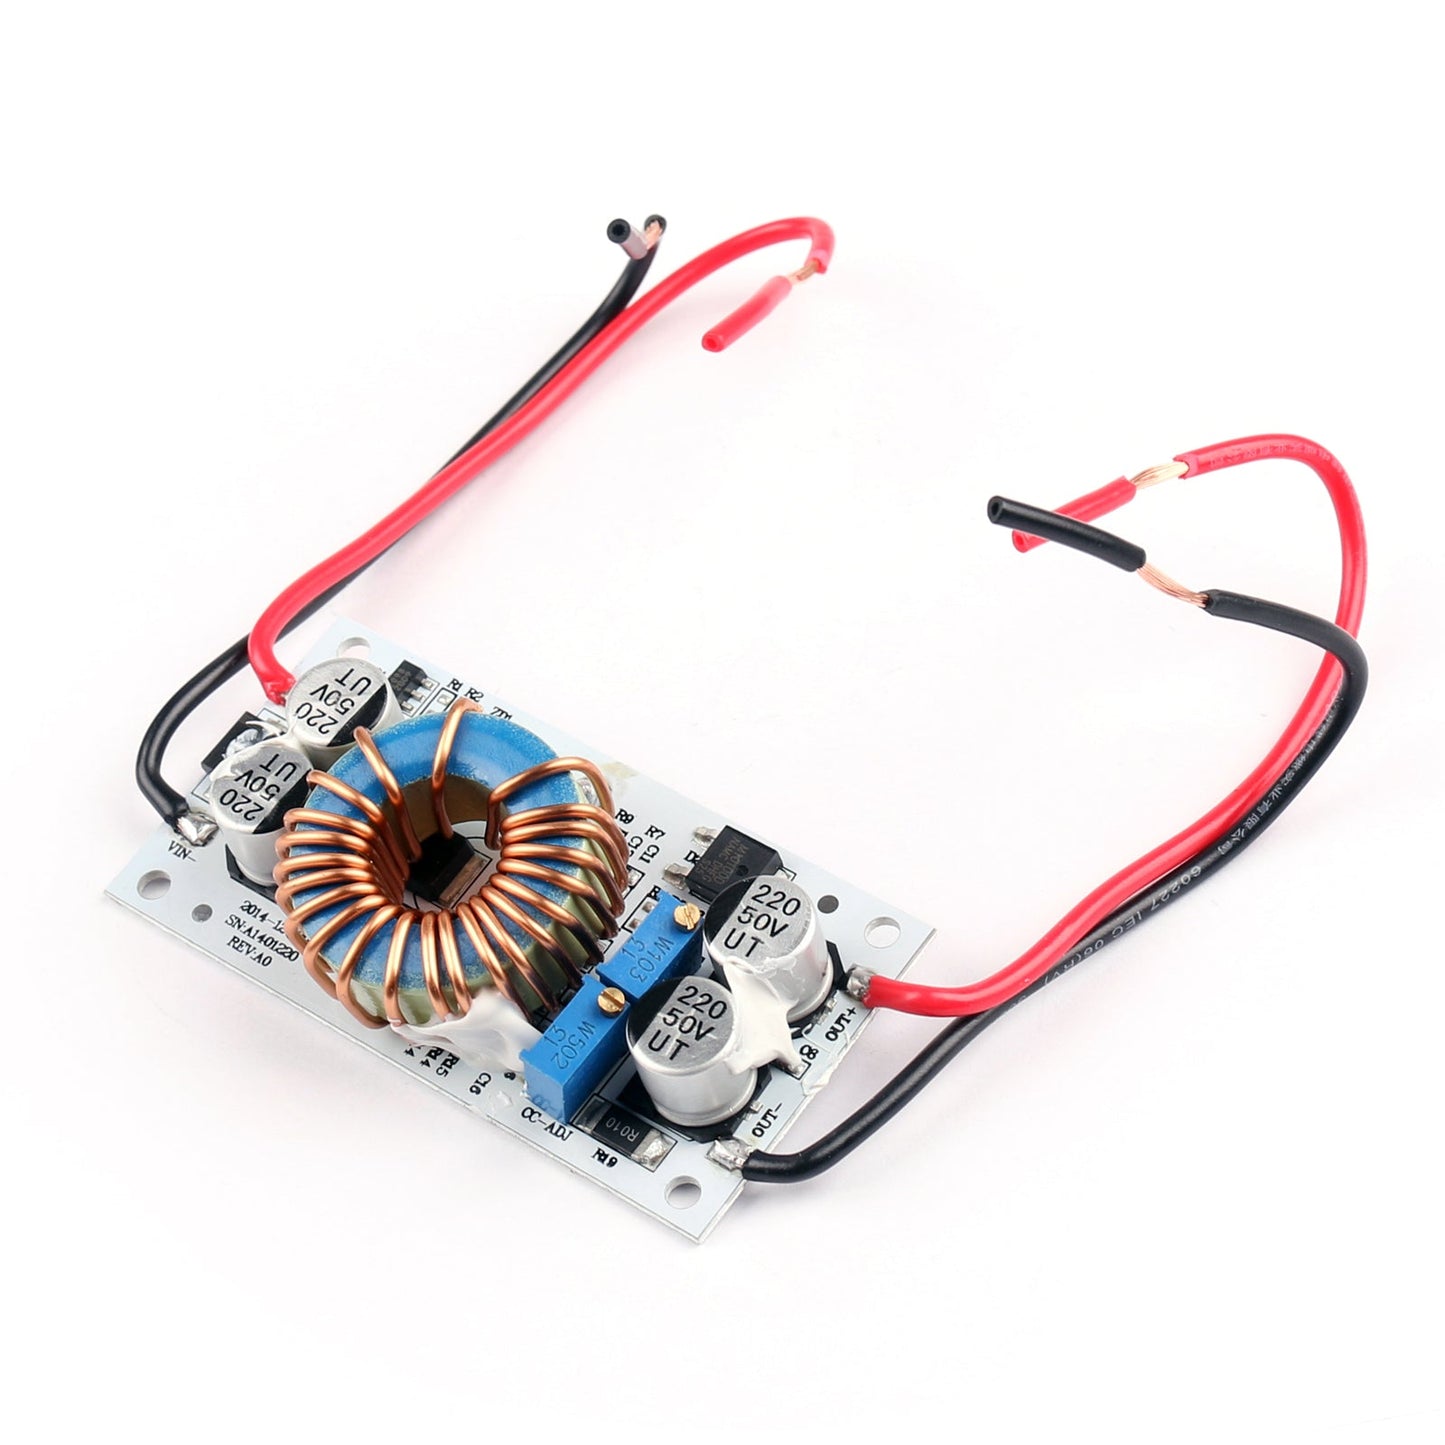 1Pcs 250W Adjustable DC Step Up Boost Converter Power Supply LED Driver 10A MAX